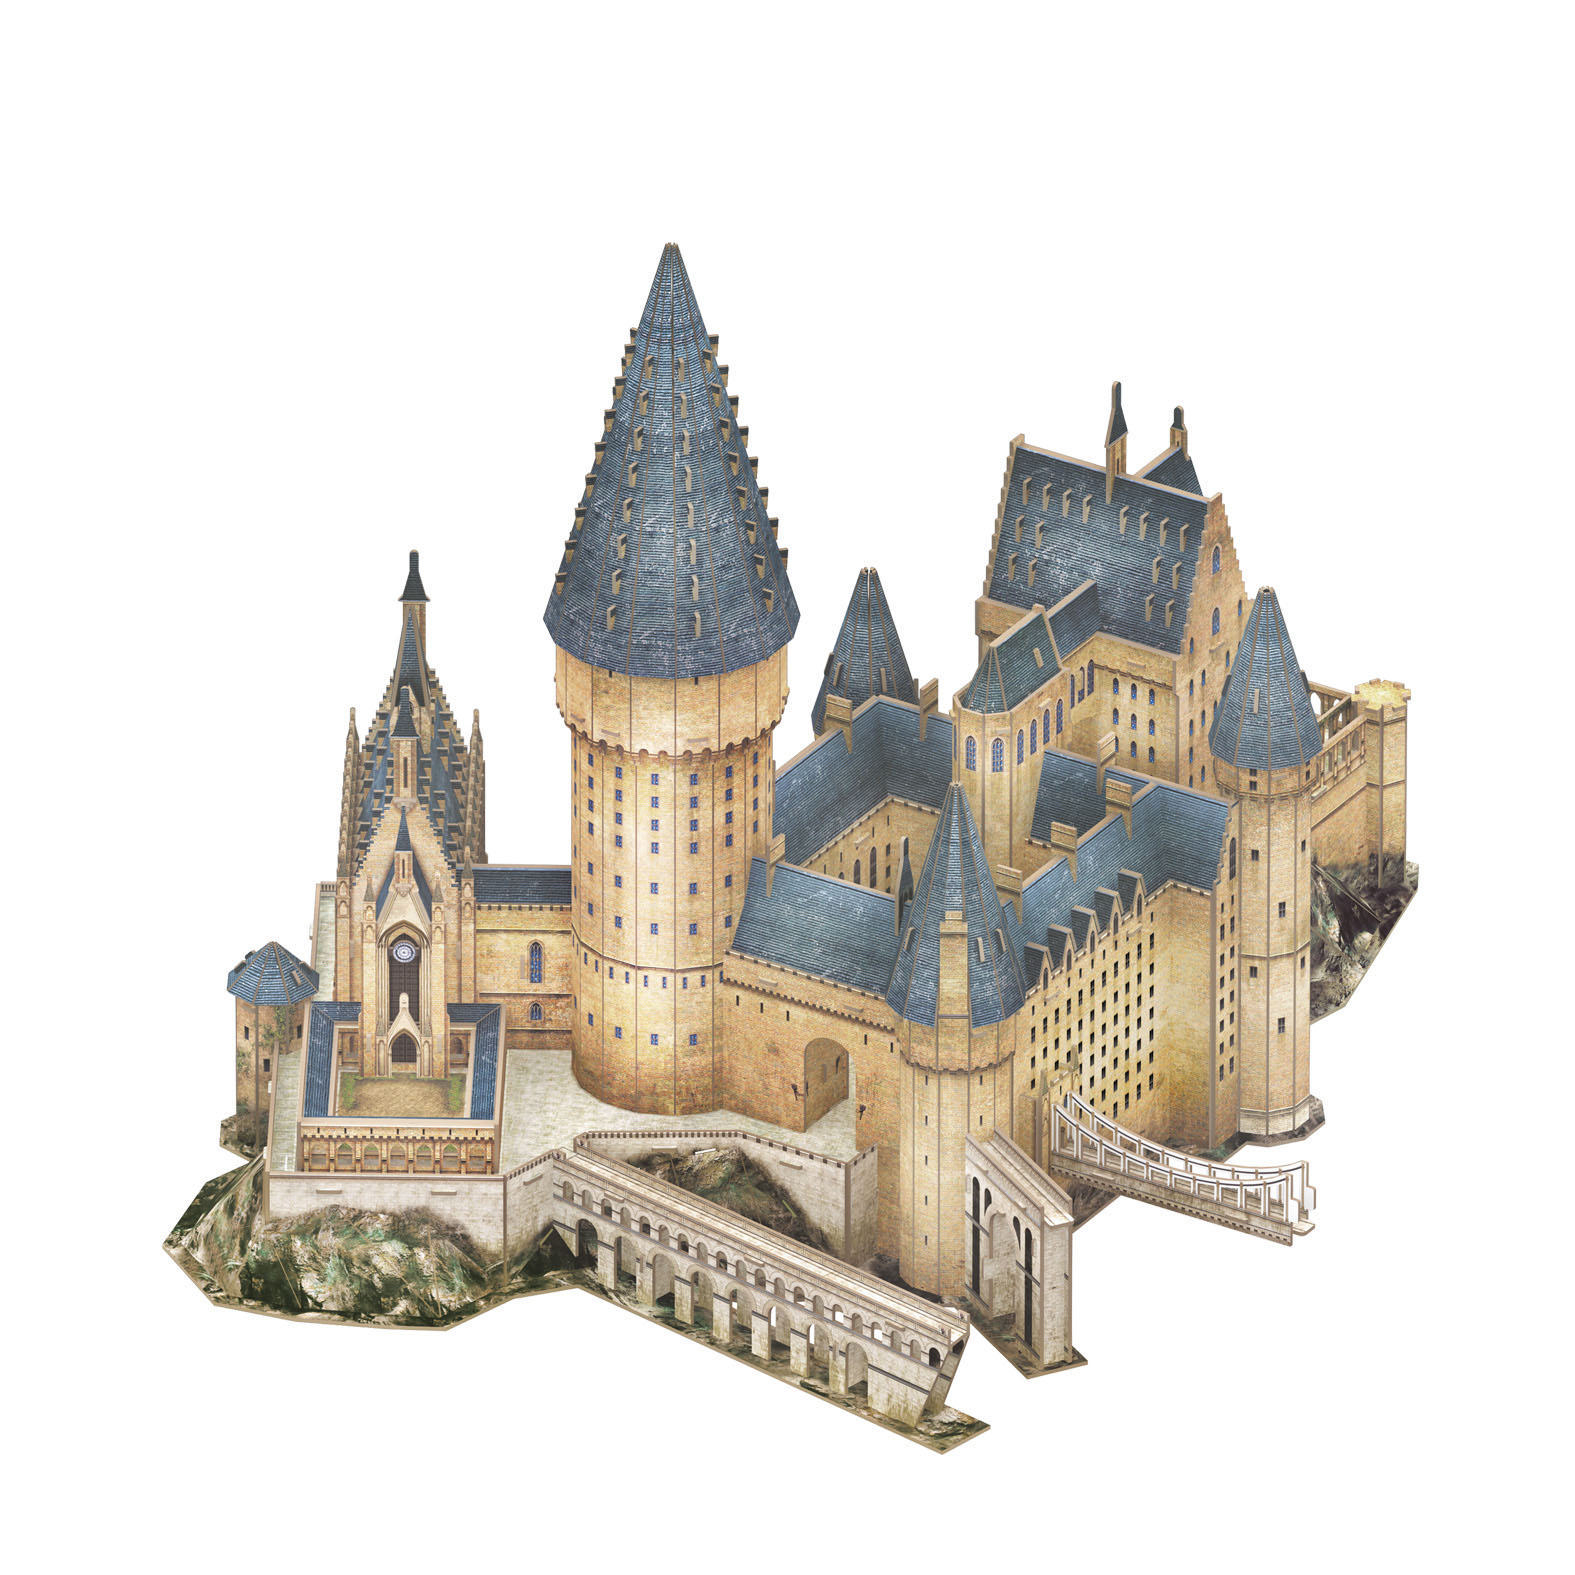 REVELL Harry Mehrfarbig Hogwarts™ 3D Hall Great Potter Puzzle